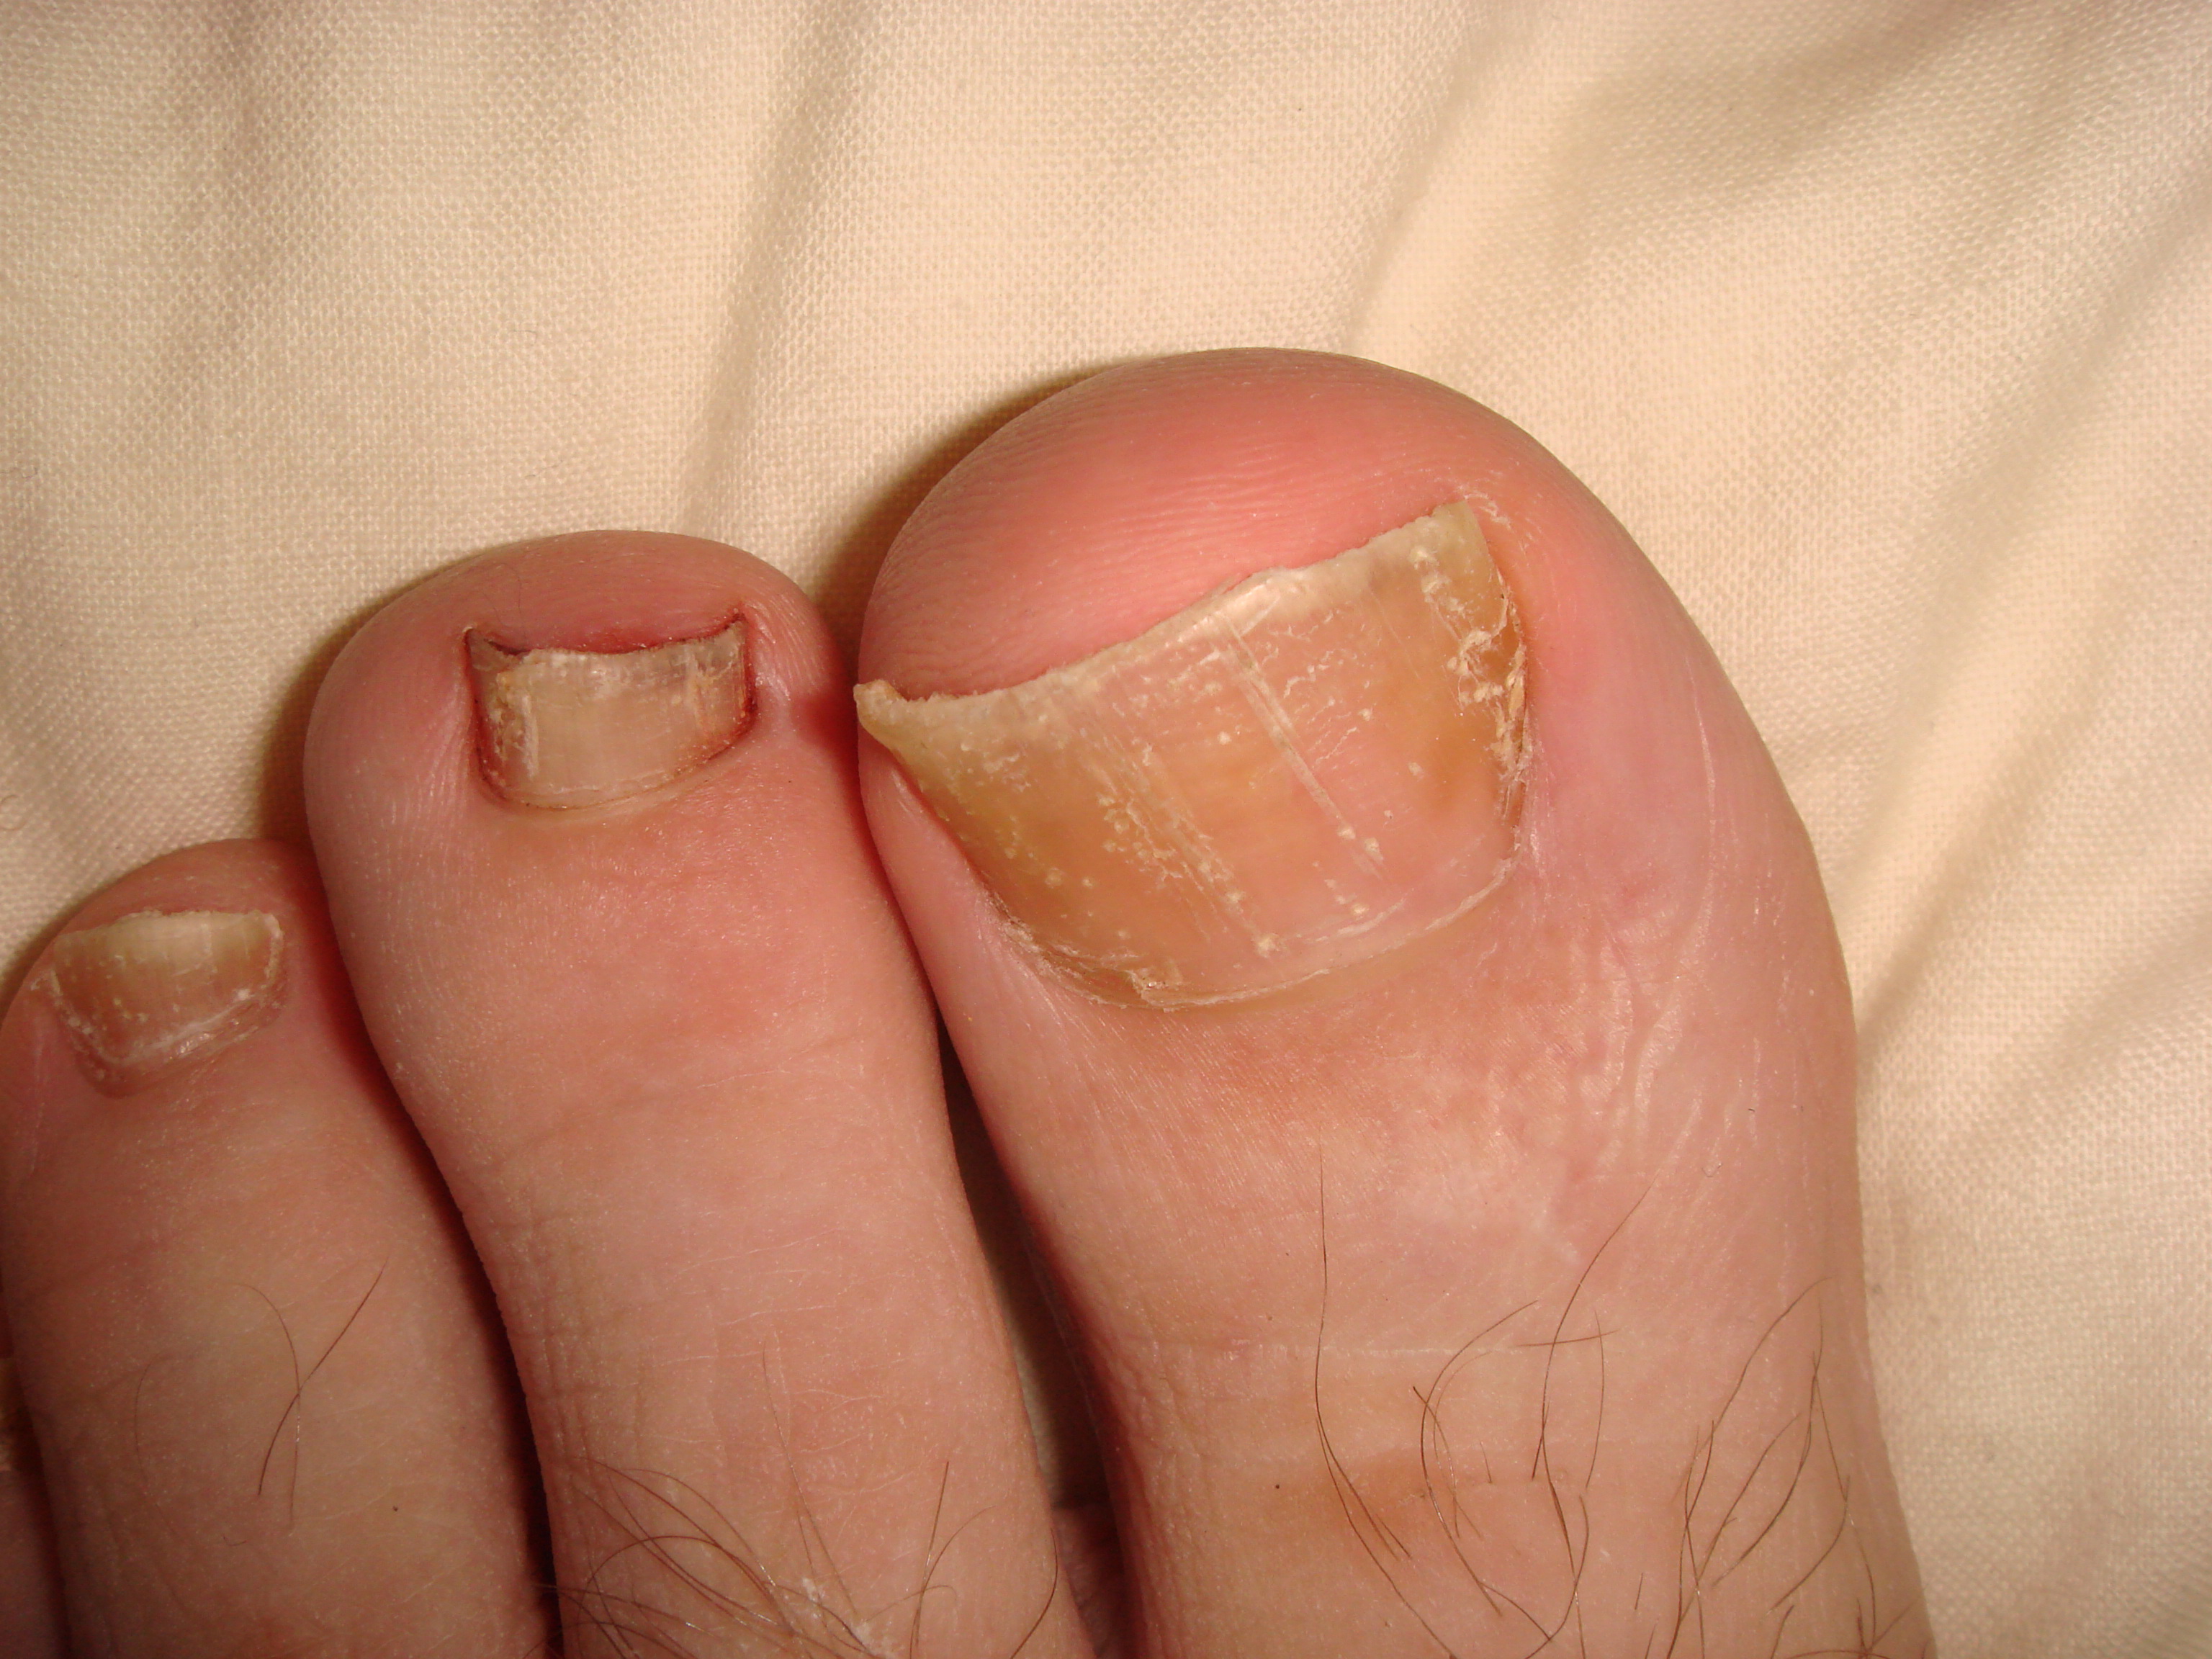 Laser Treatments For Patients Suffering From Toenail Fungus